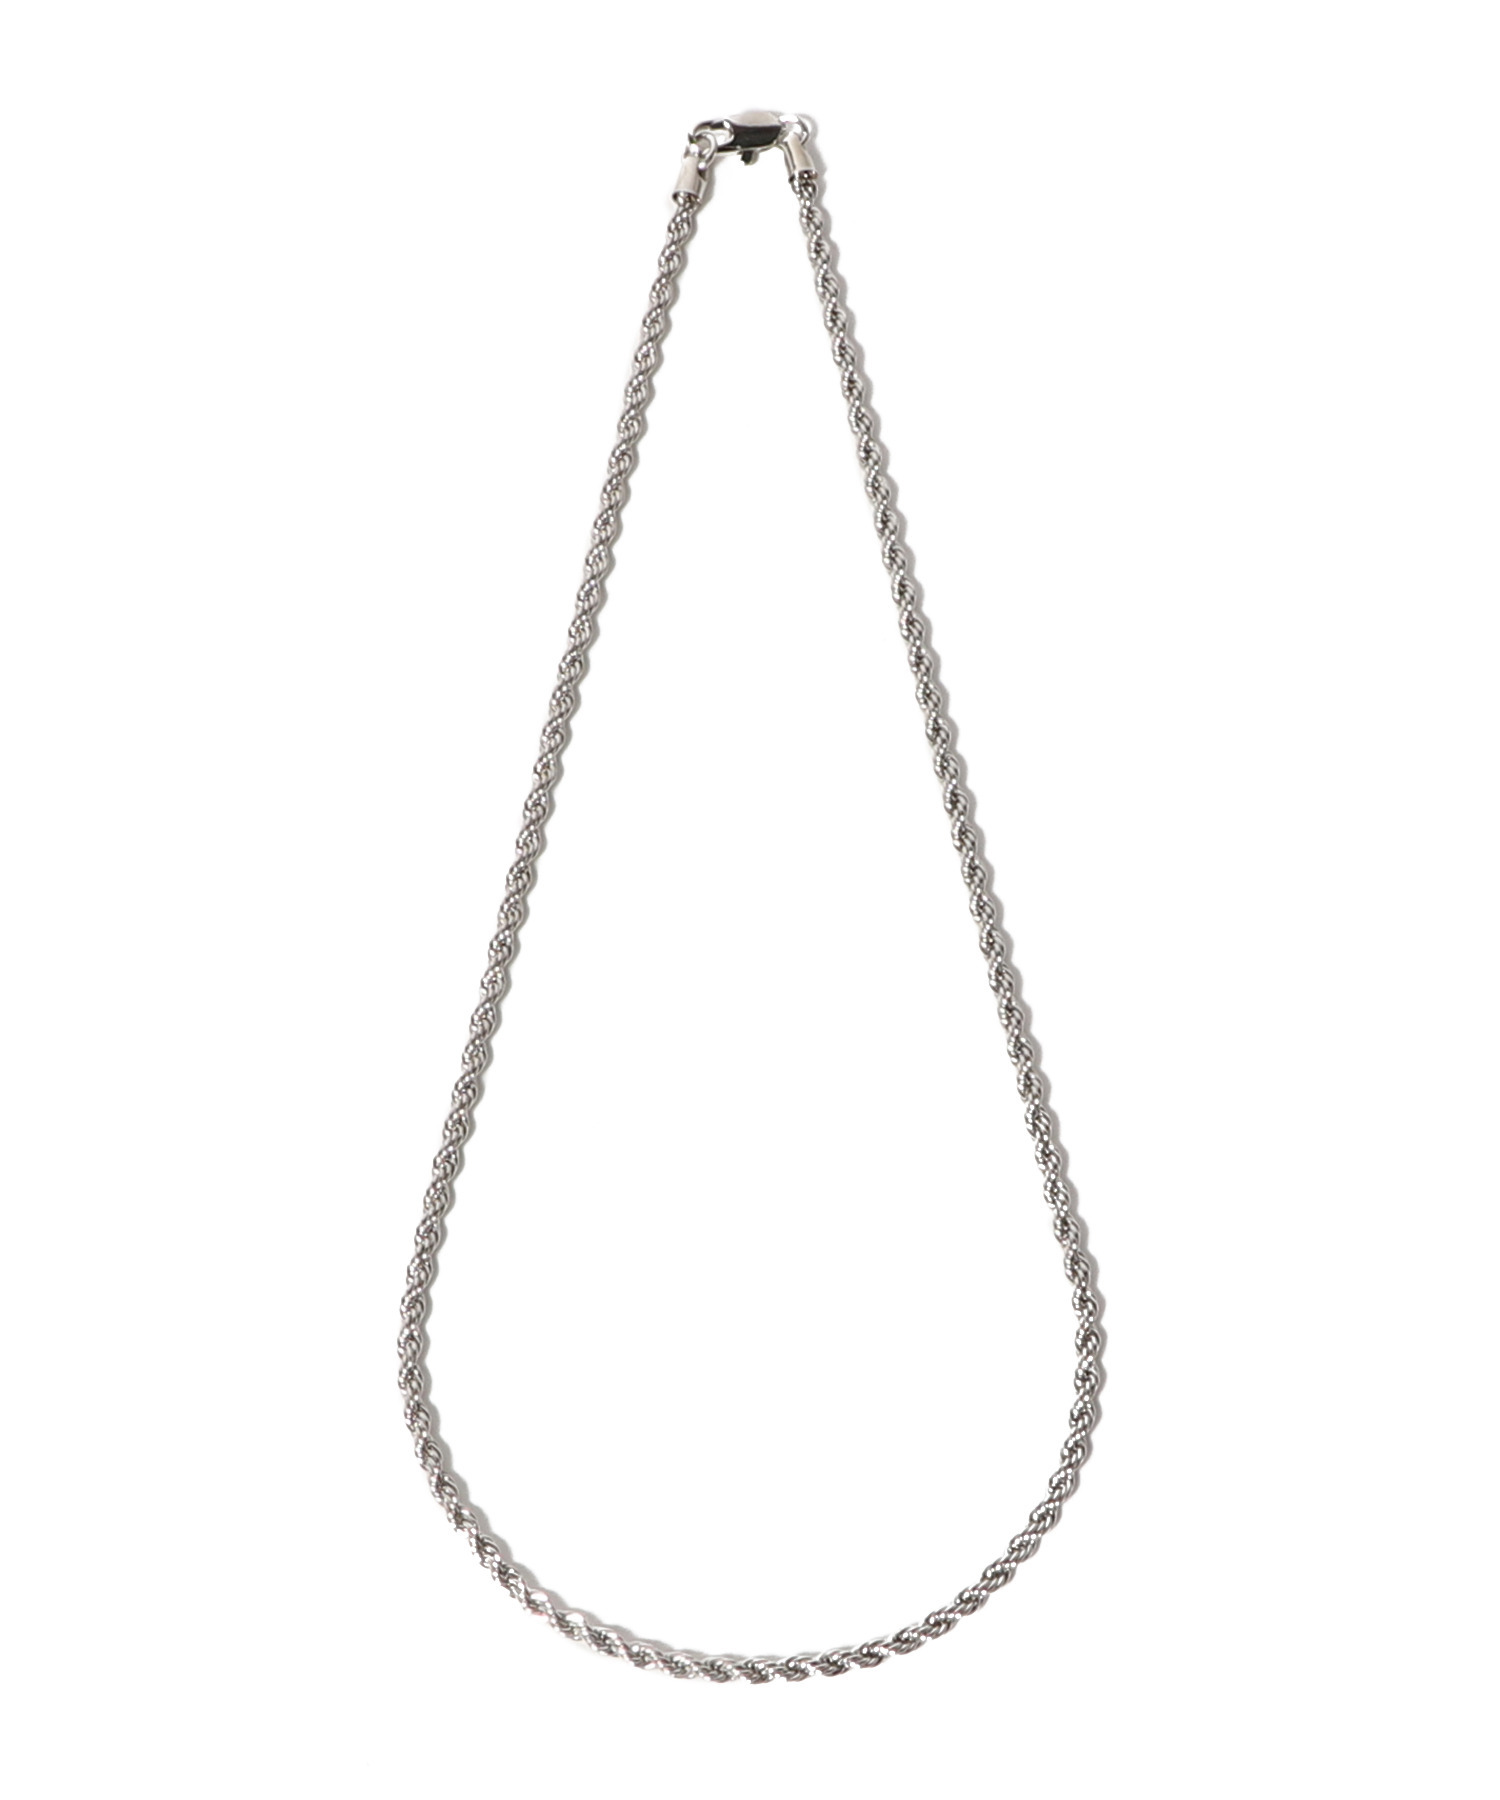 LAURA LOMBARDI / ROPE CHAIN ネックレス｜ESTNATION ONLINE STORE｜エストネーション 公式通販